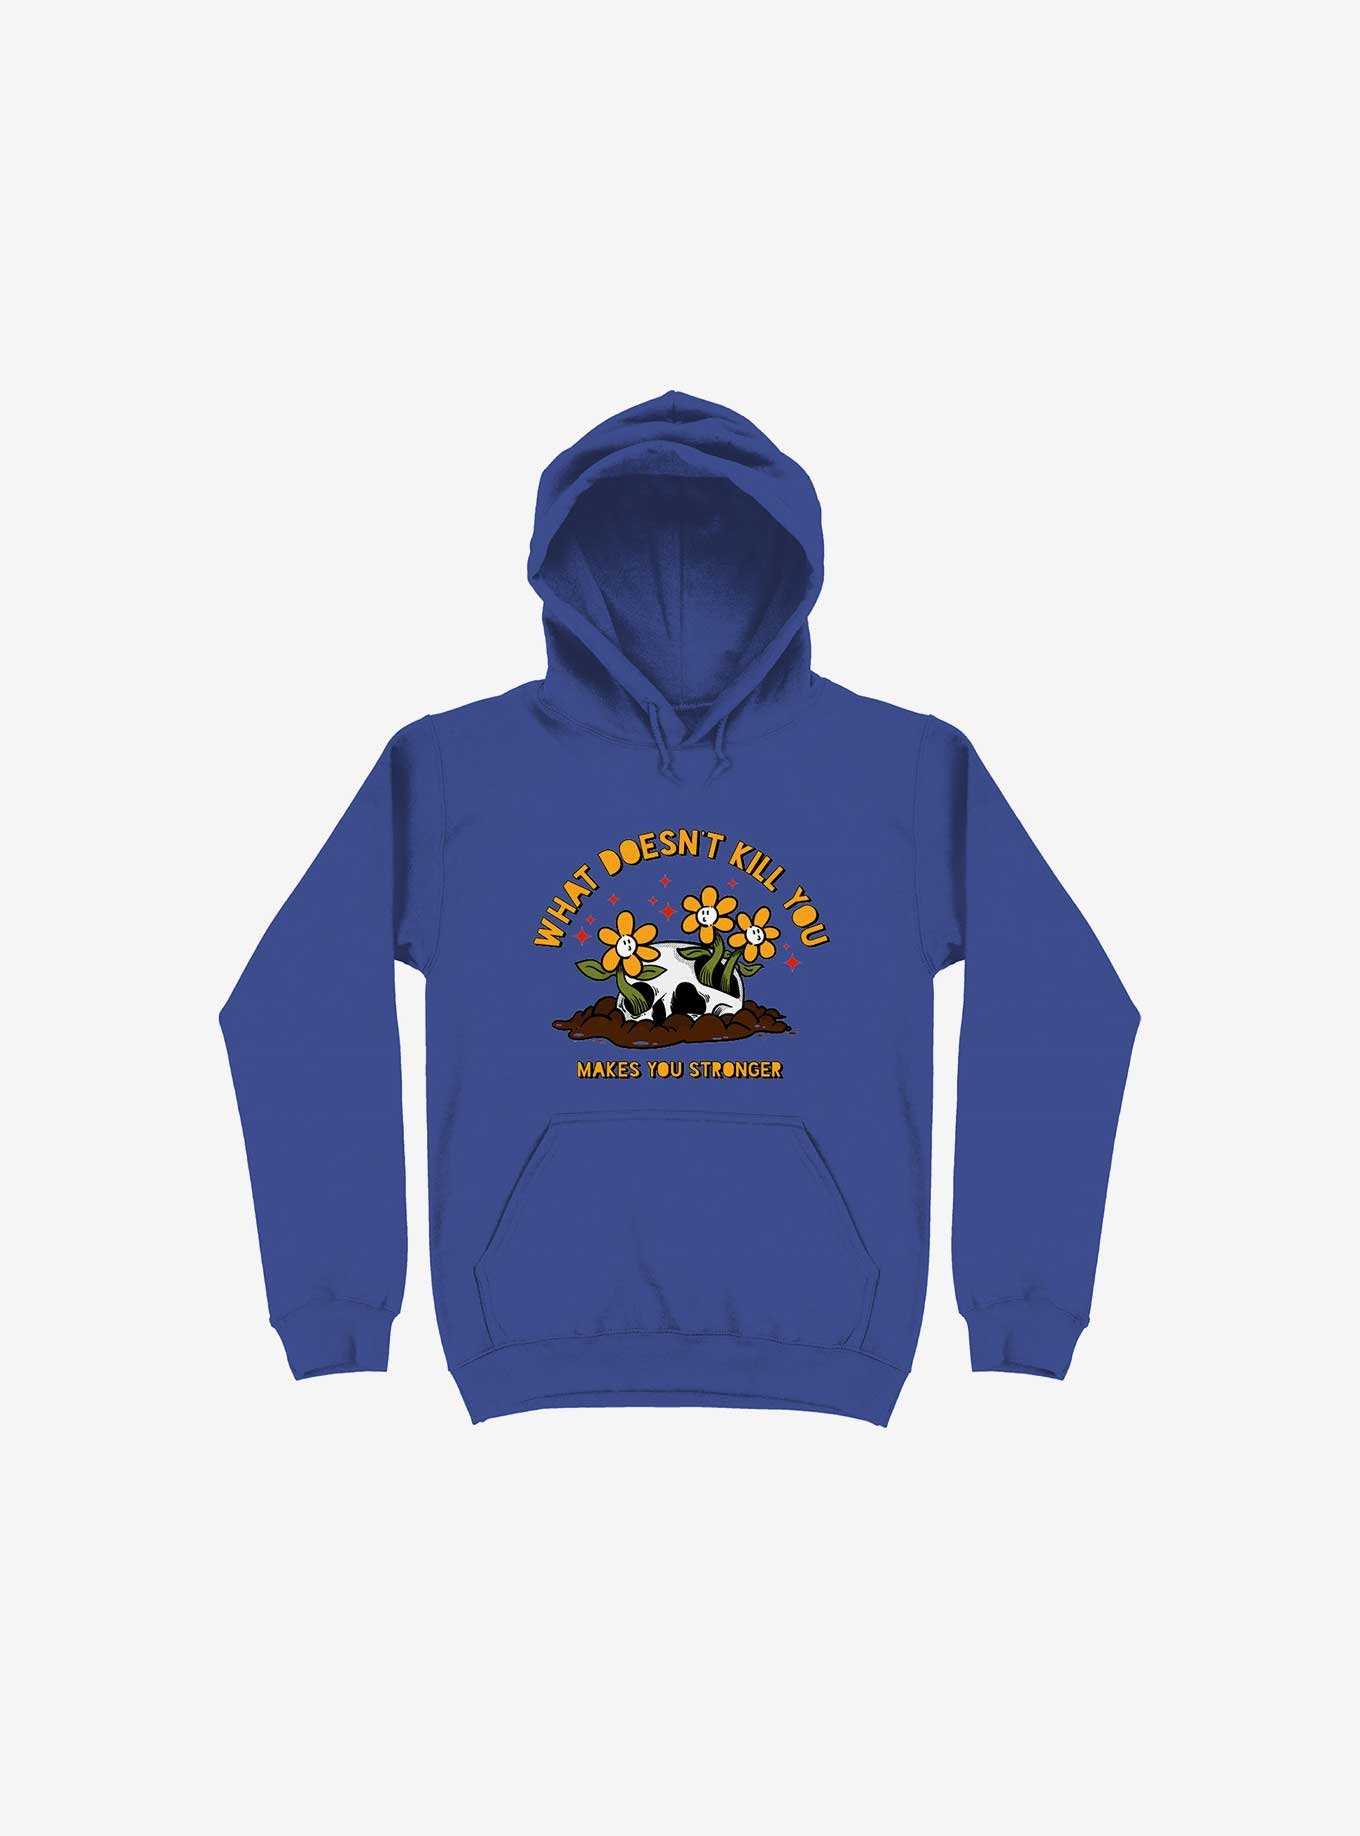 What Doesn't Kill You Makes You Stronger Hoodie, , hi-res